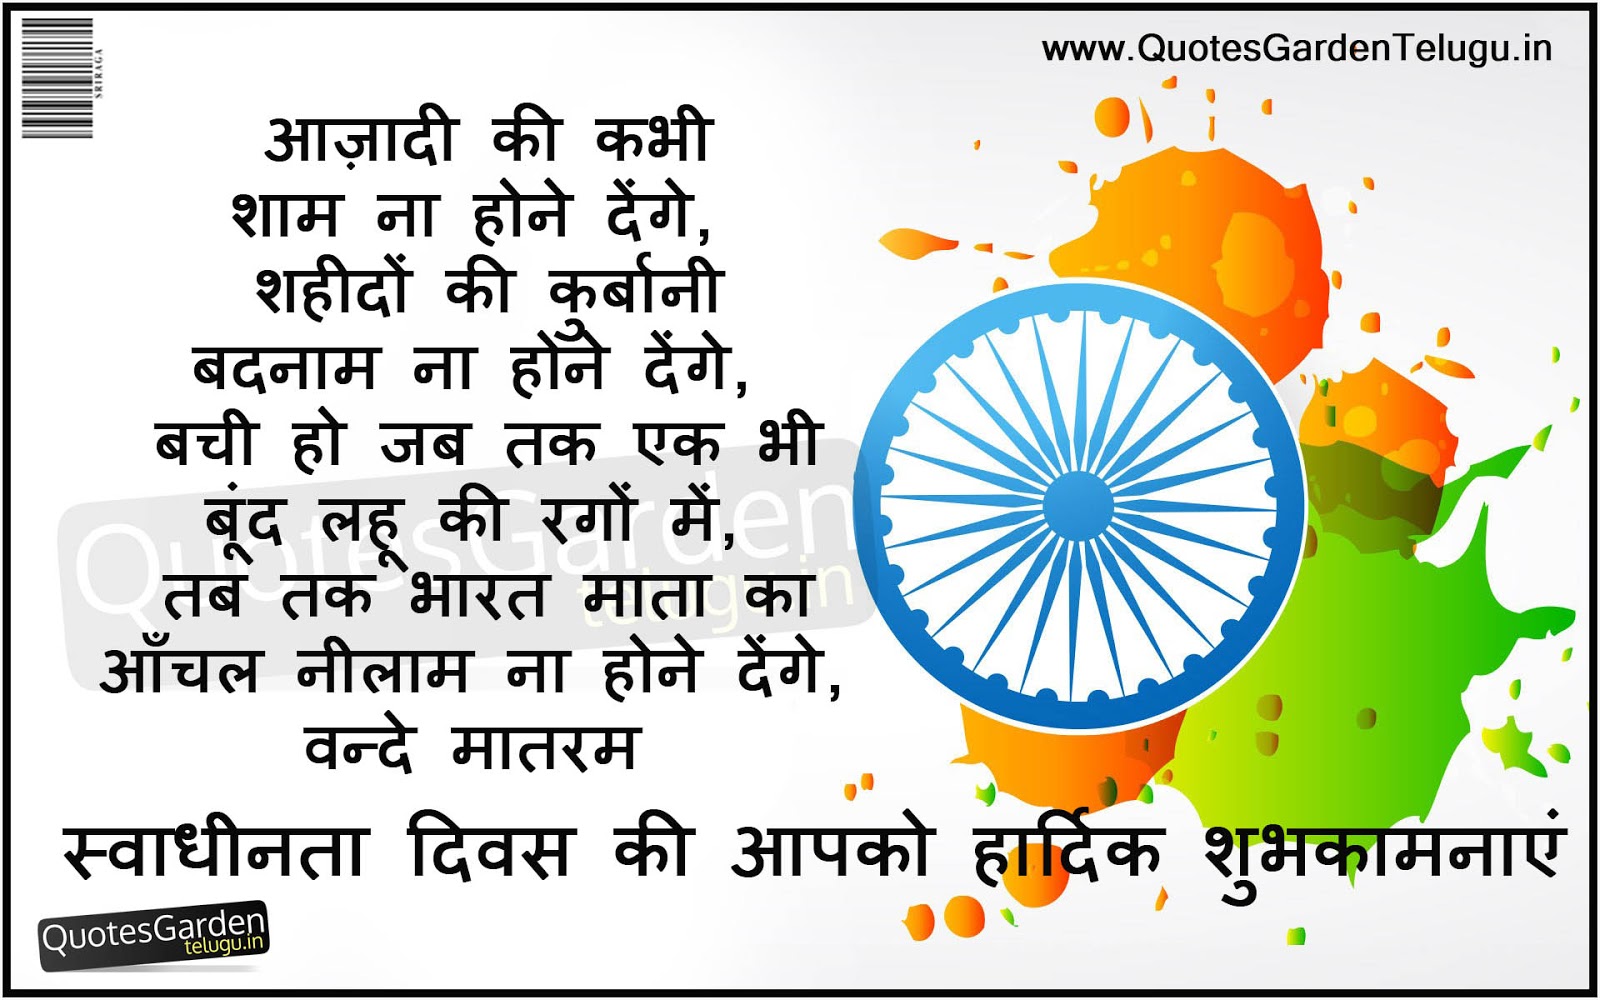 Happy independence day greetings messages 2016 in hindi | QUOTES ...